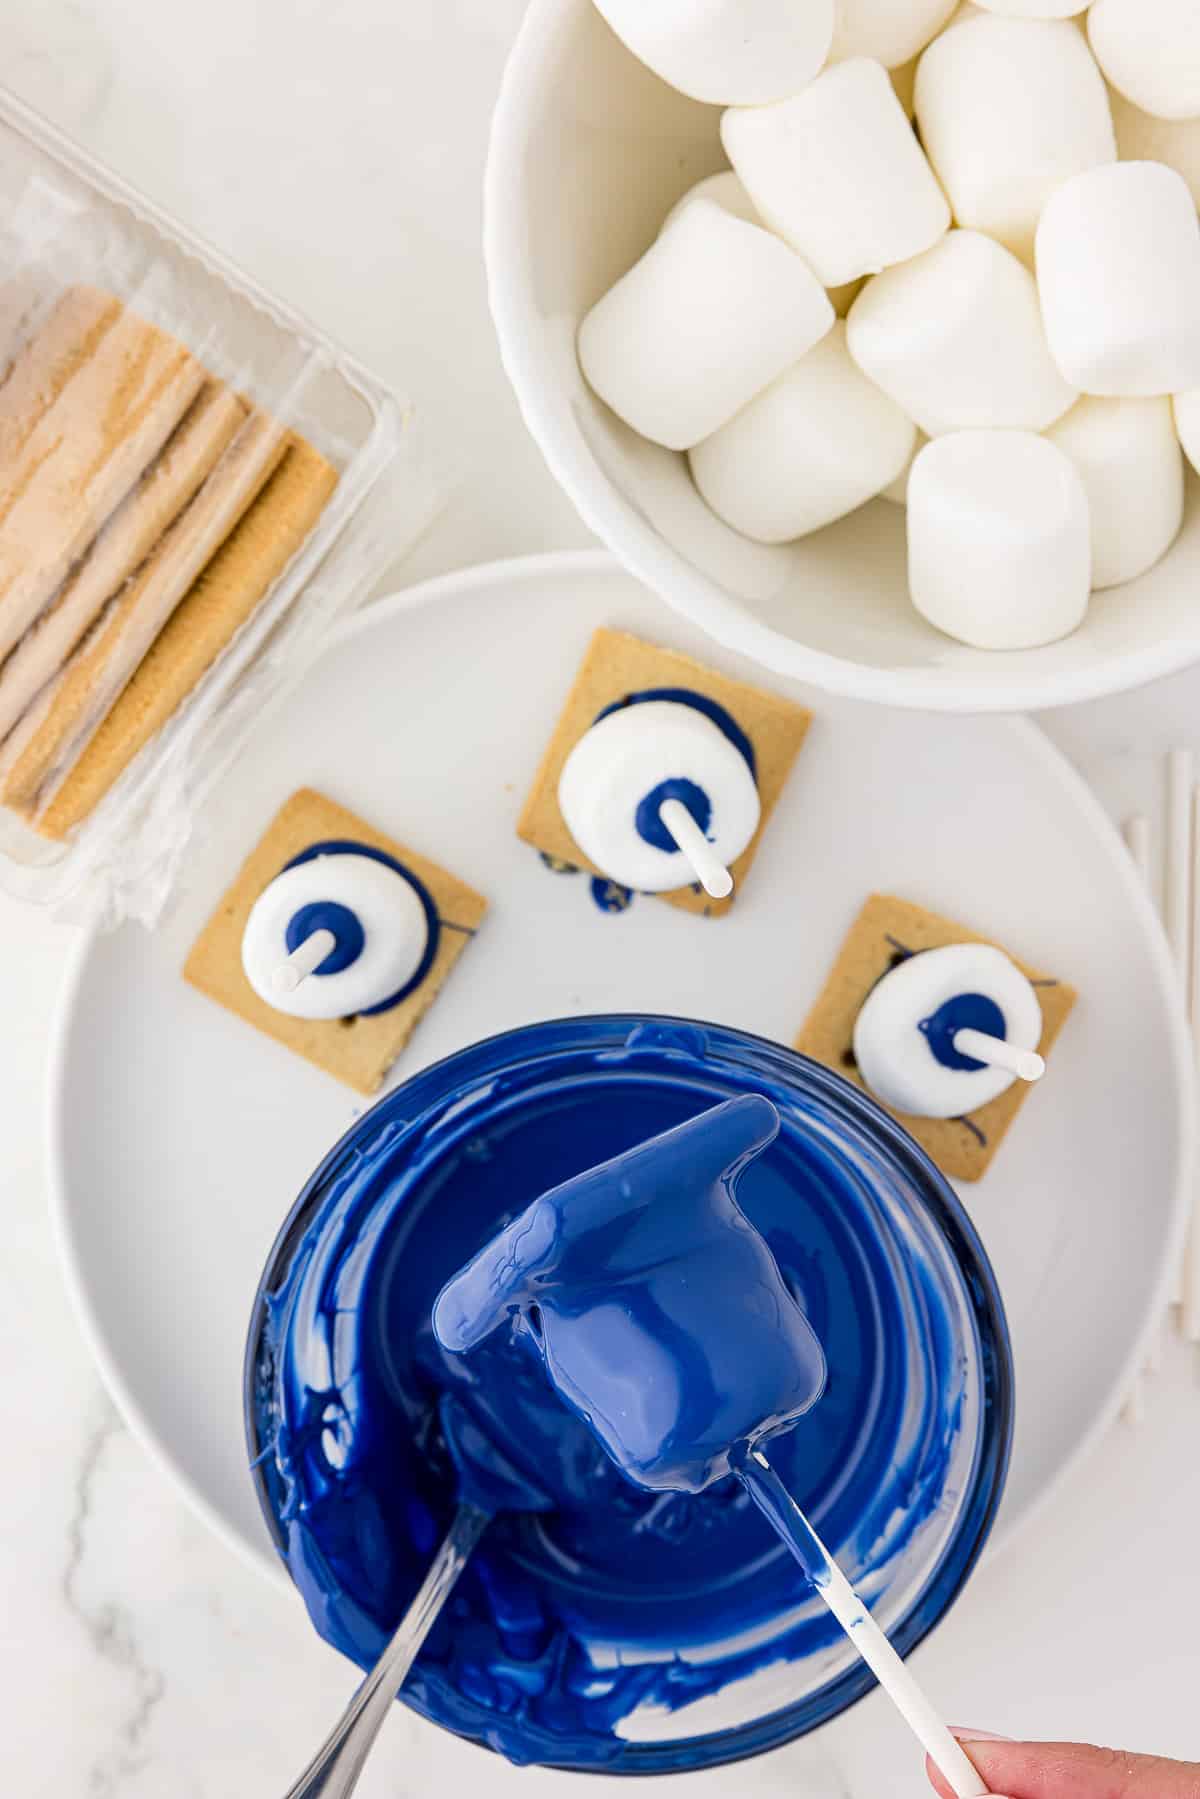 A white bowl of large marshmallows and a tray of graham crackers to be dipped into a bowl of melted blue chocolate